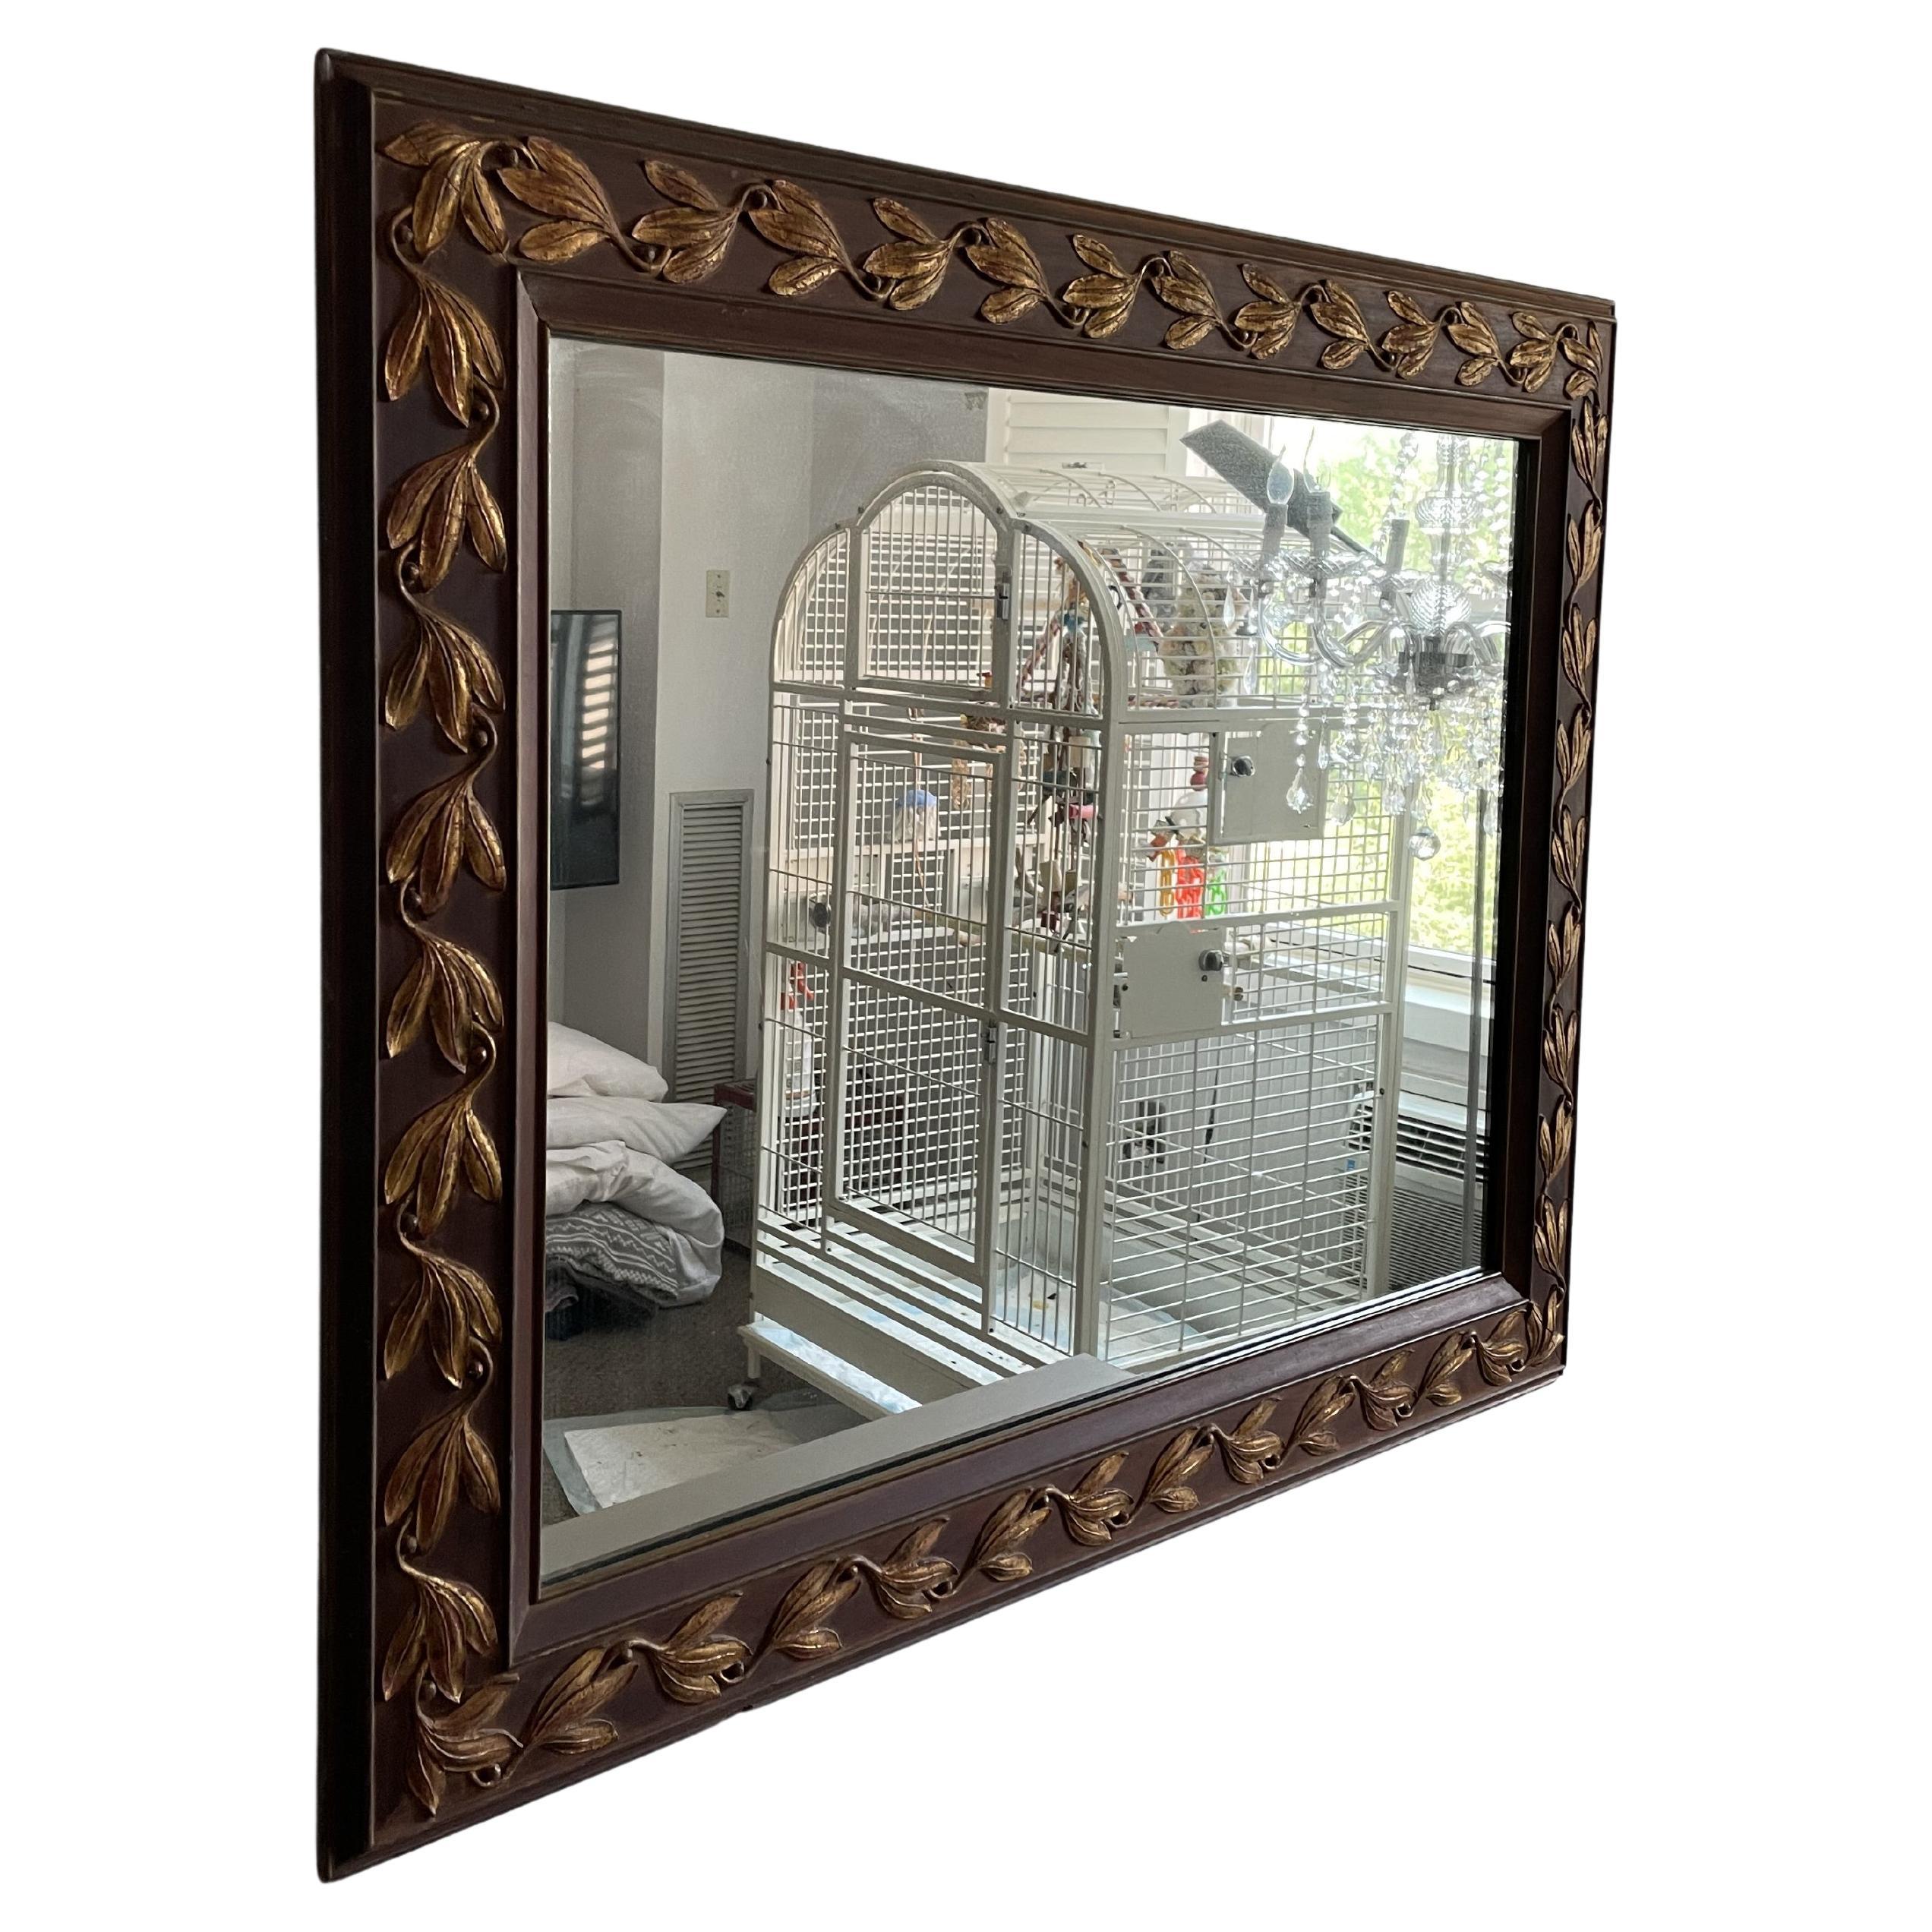 Classic Widdicomb styling in this fabulous wooden mirror with gilt leaf reliefs.
Curbside to NYC/Philly $350.